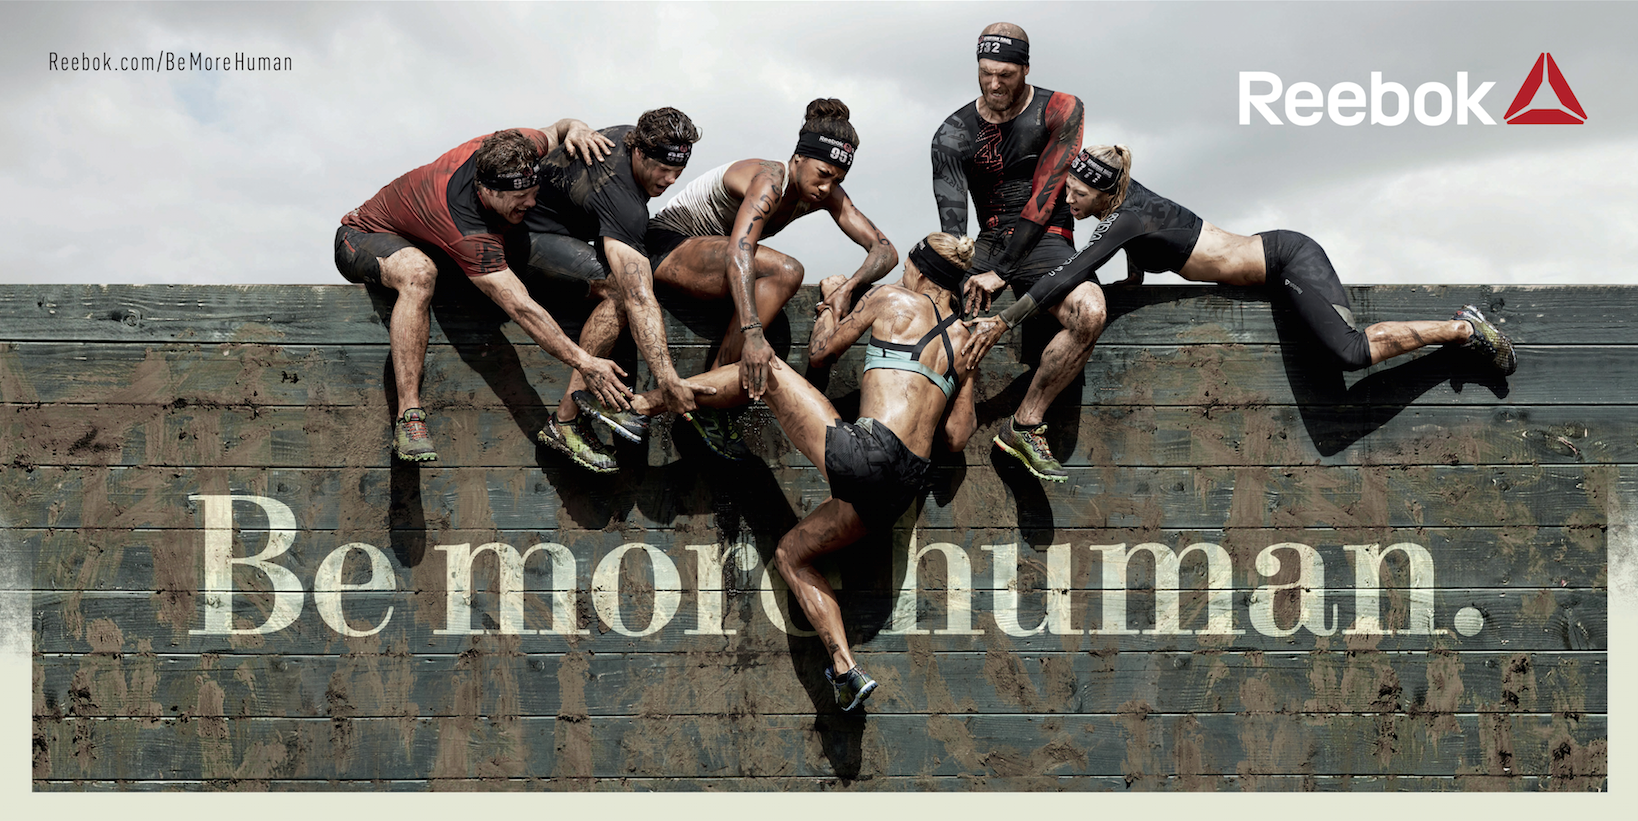 Reebok Challenges the World to "Be More Human" New Brand Campaign